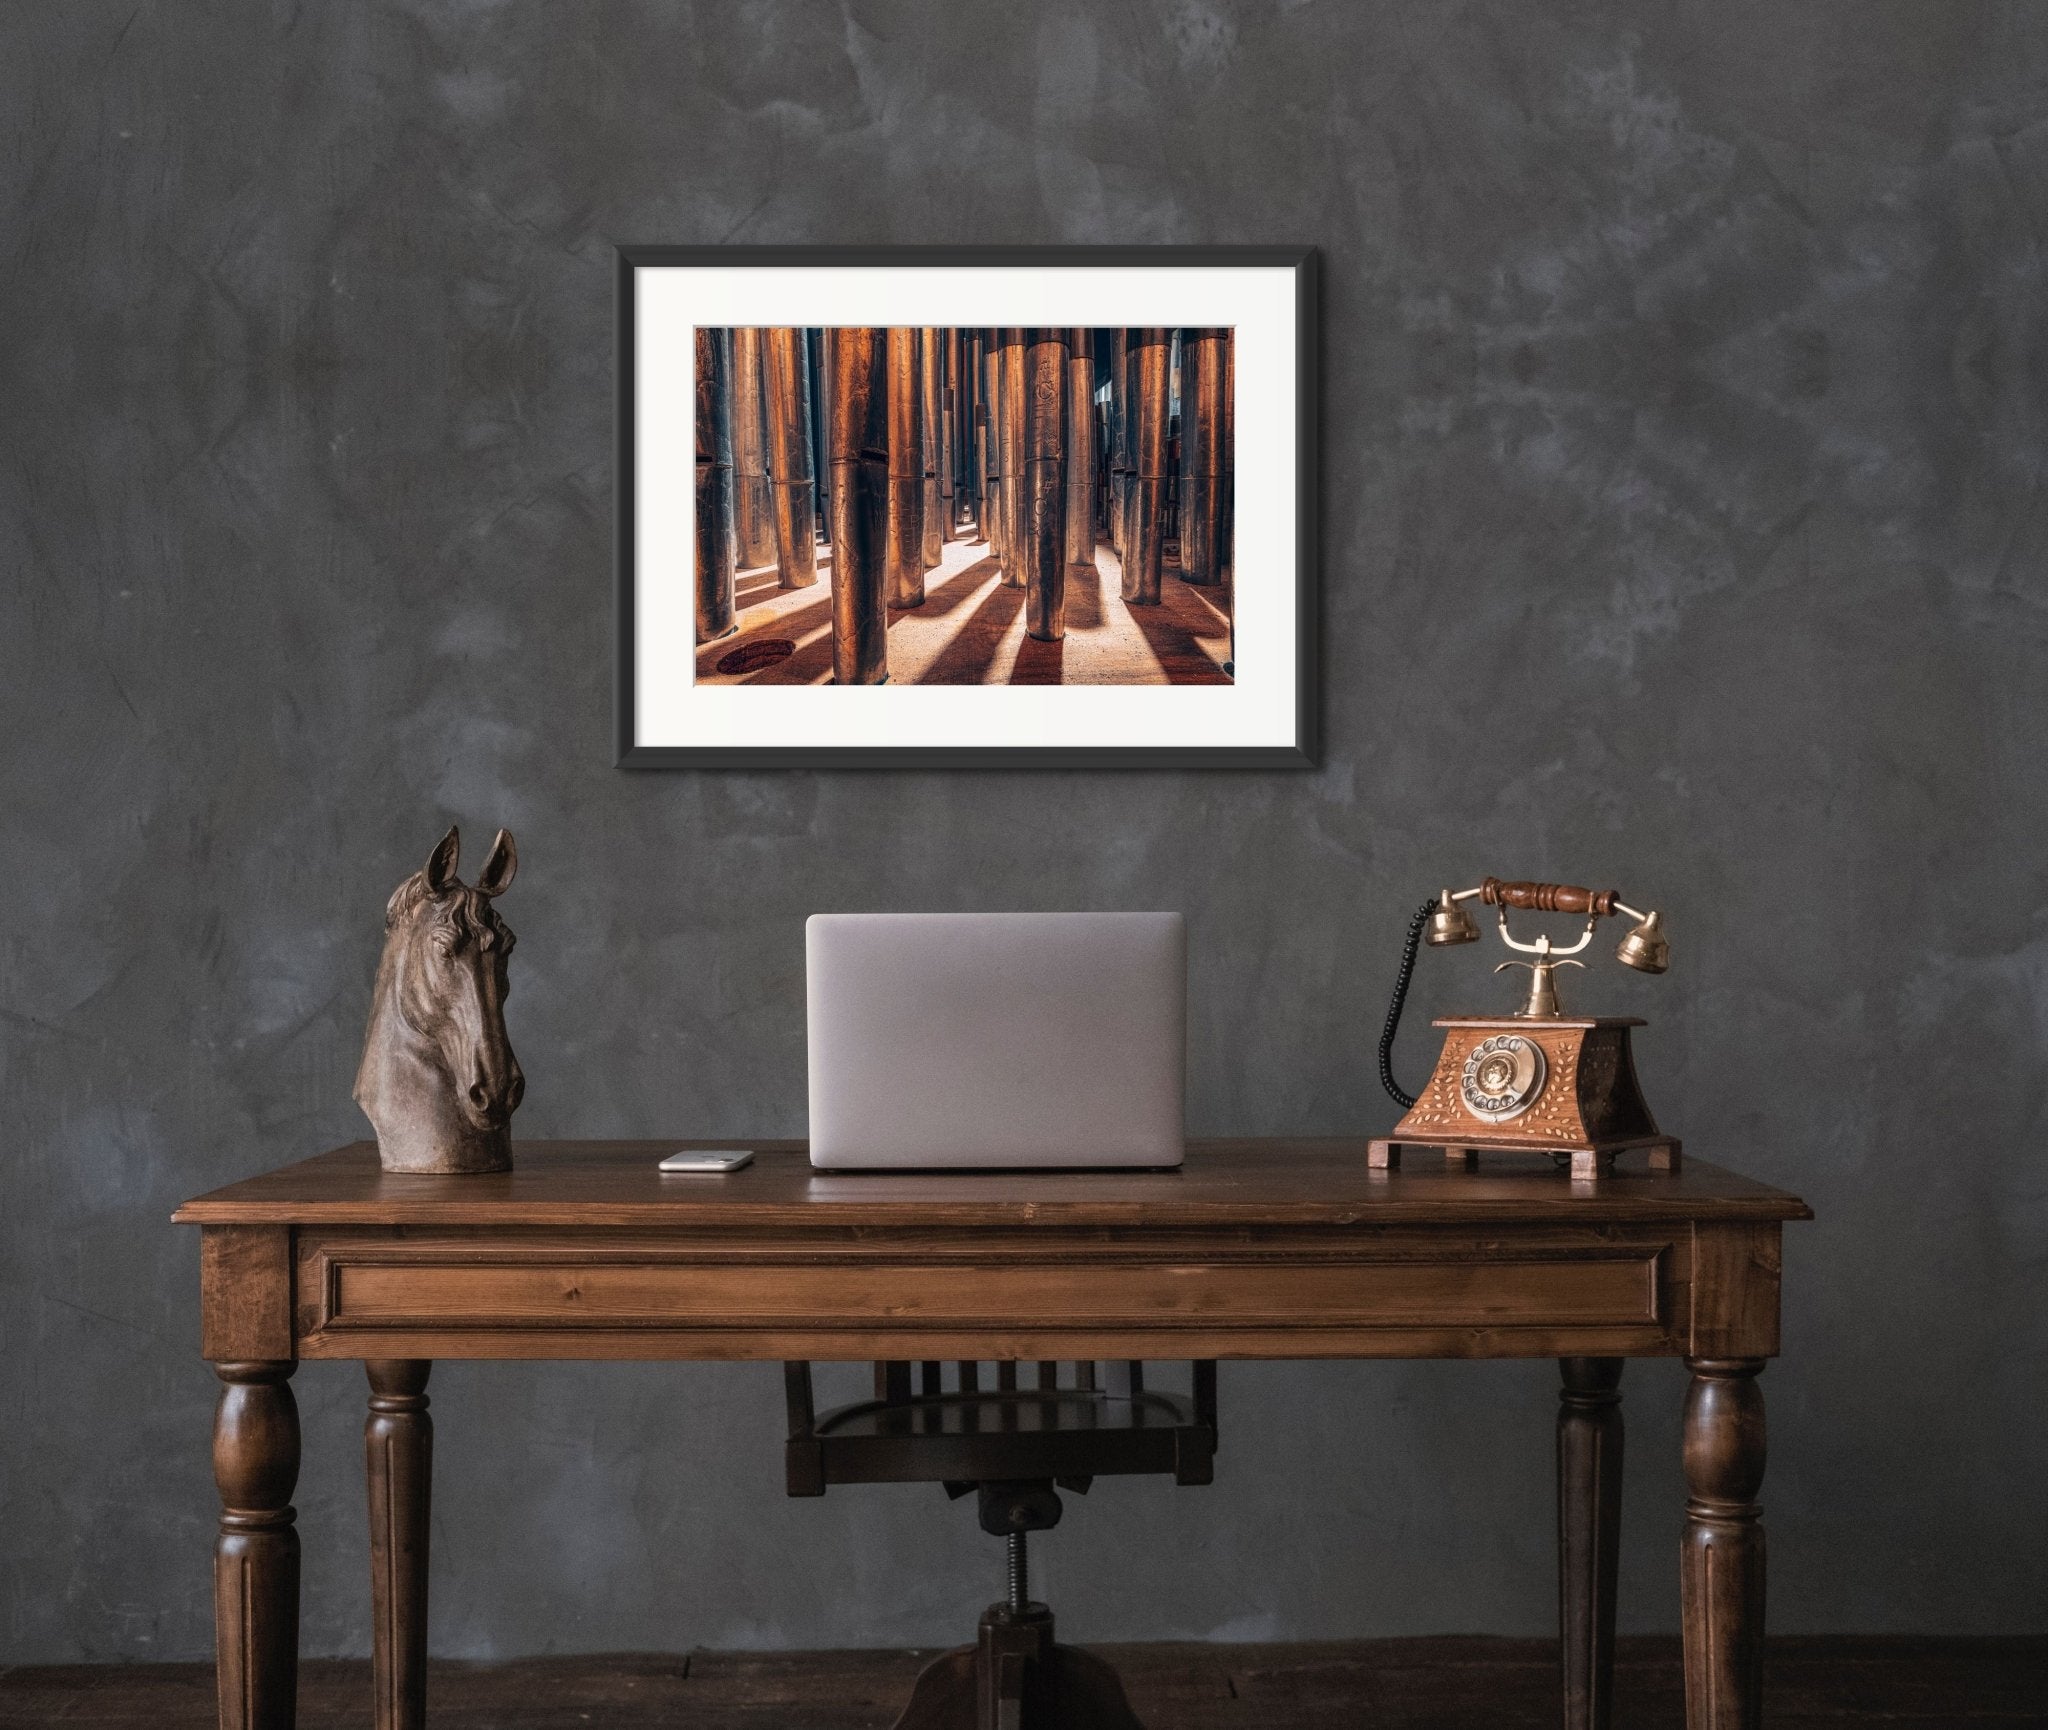 Photo of St Marks Pipe Organ, Part 1. Framed & Signed Limited Edition Museum Quality Print. - Giclée - Architecture In Music